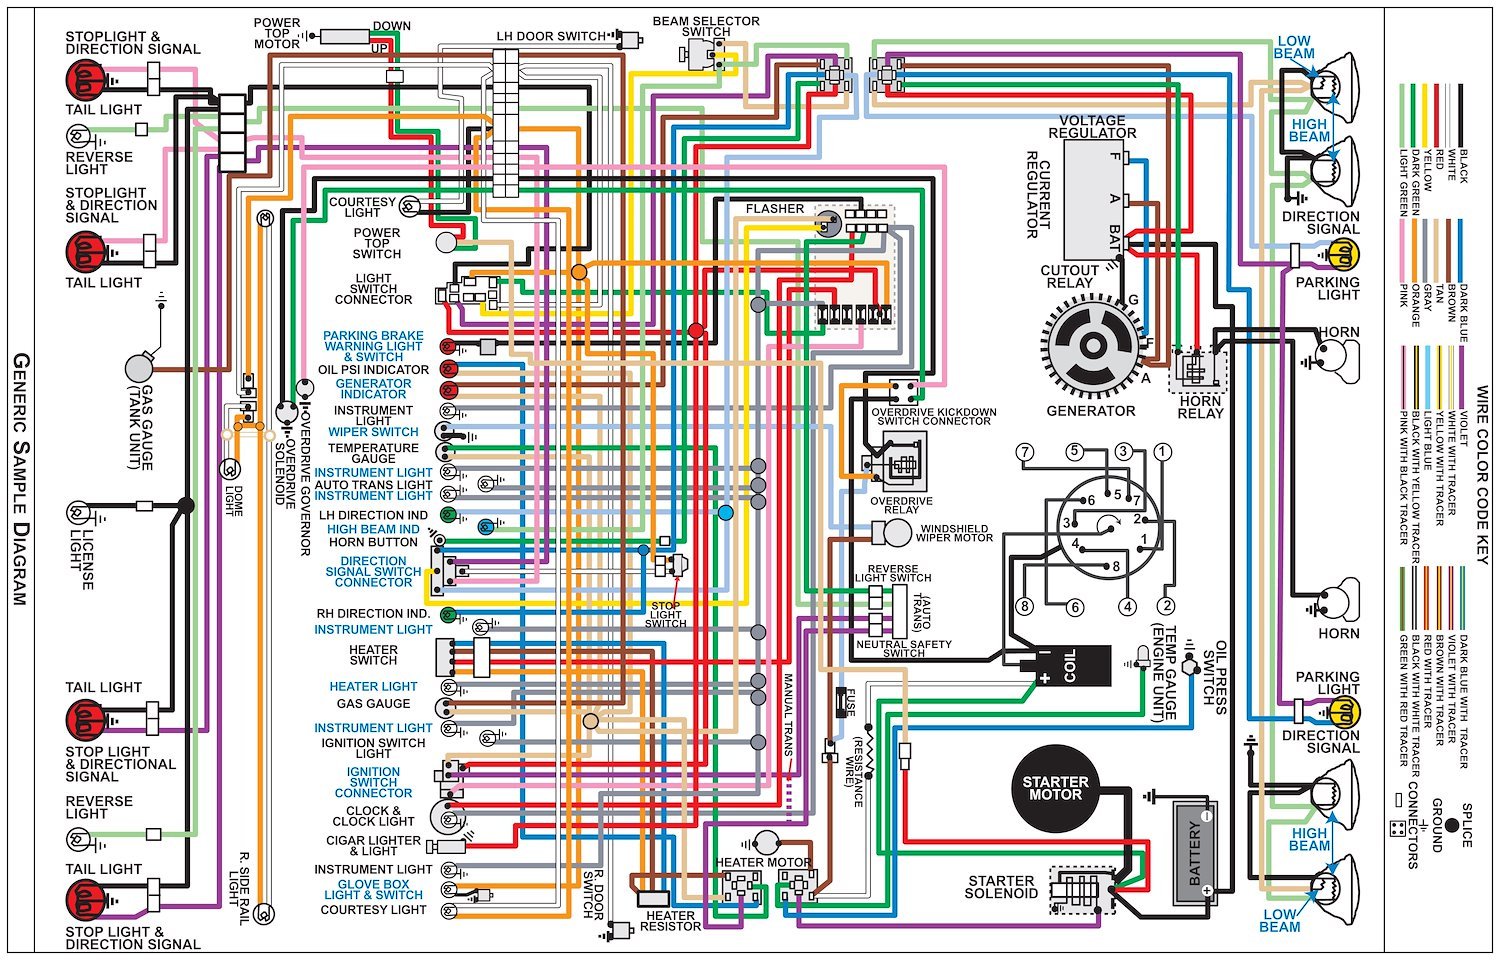 Wiring Diagram for 1940 Mercury, 11 in x 17 in., Laminated